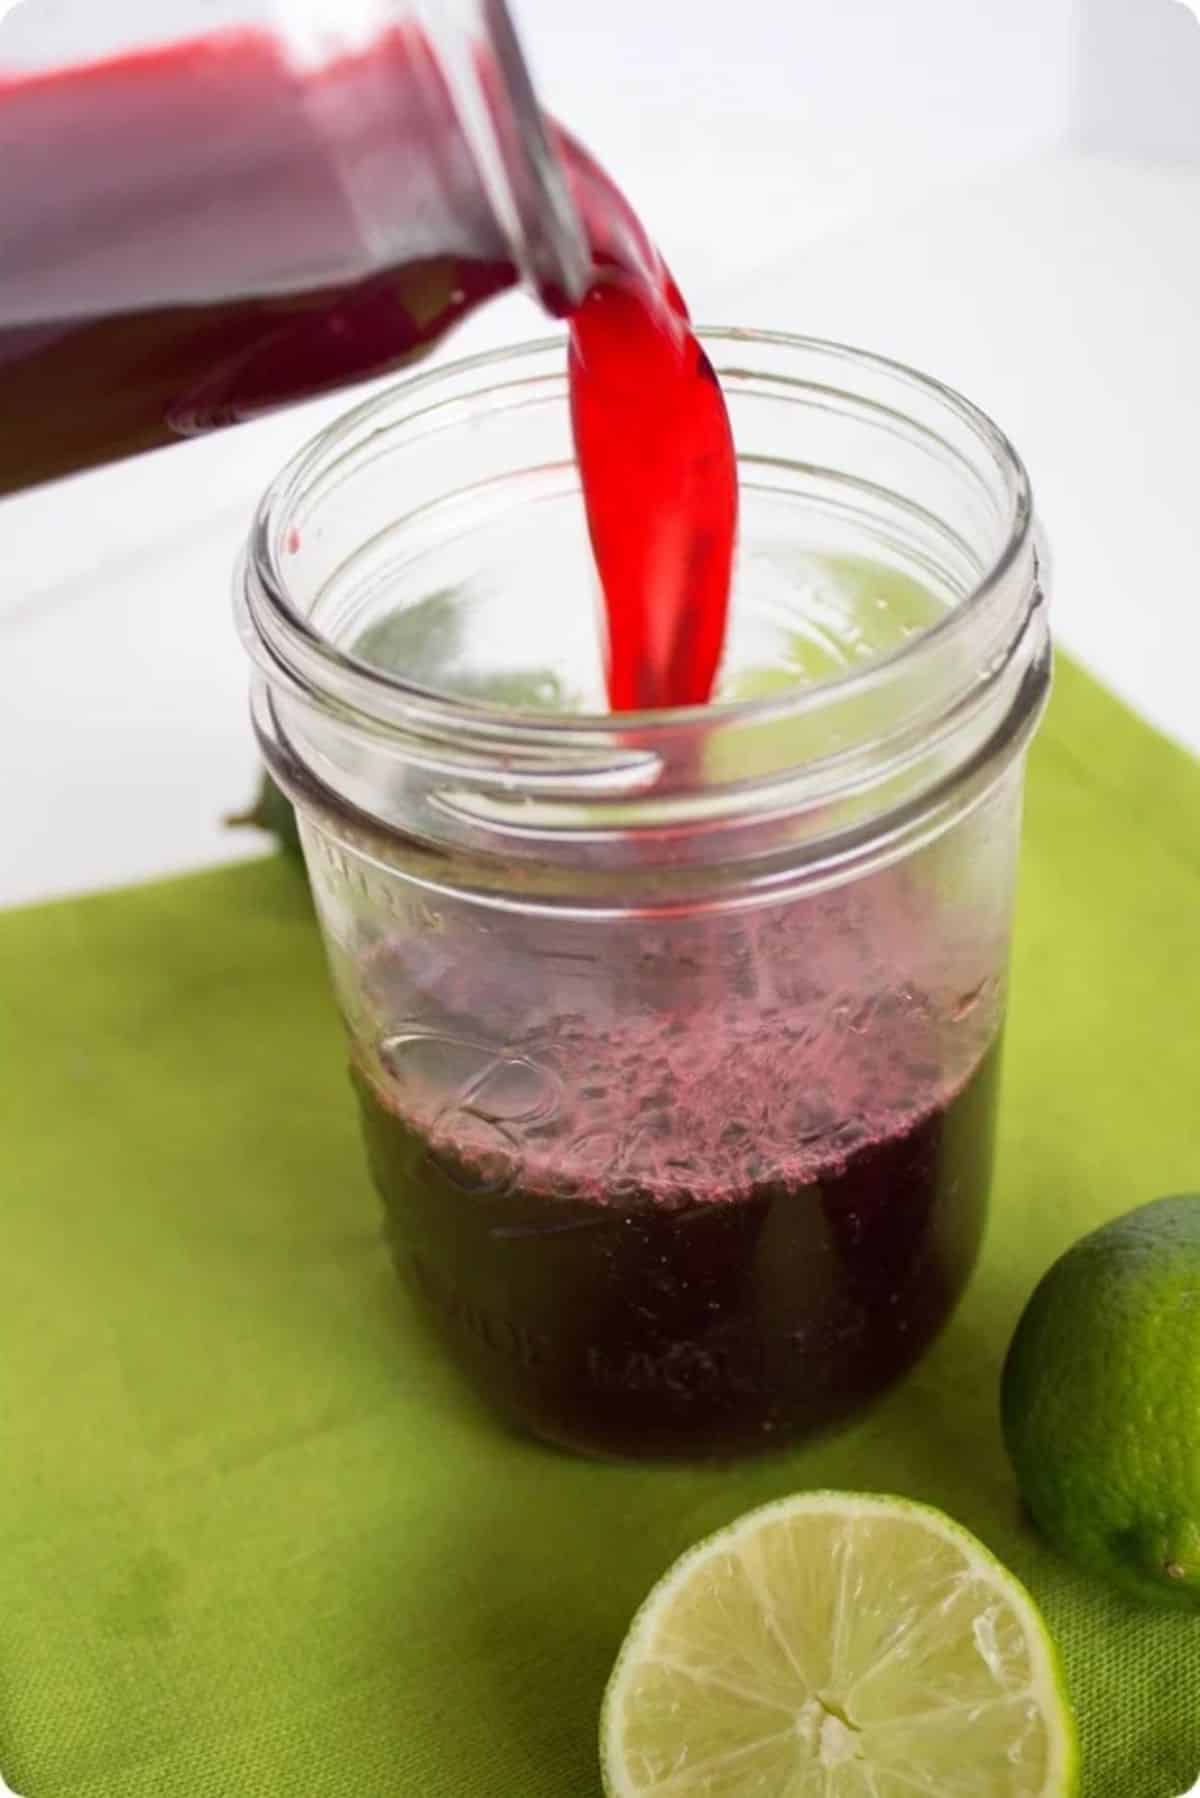 Healthy tart cherry sports drink in a glass jar poured from a bottle.